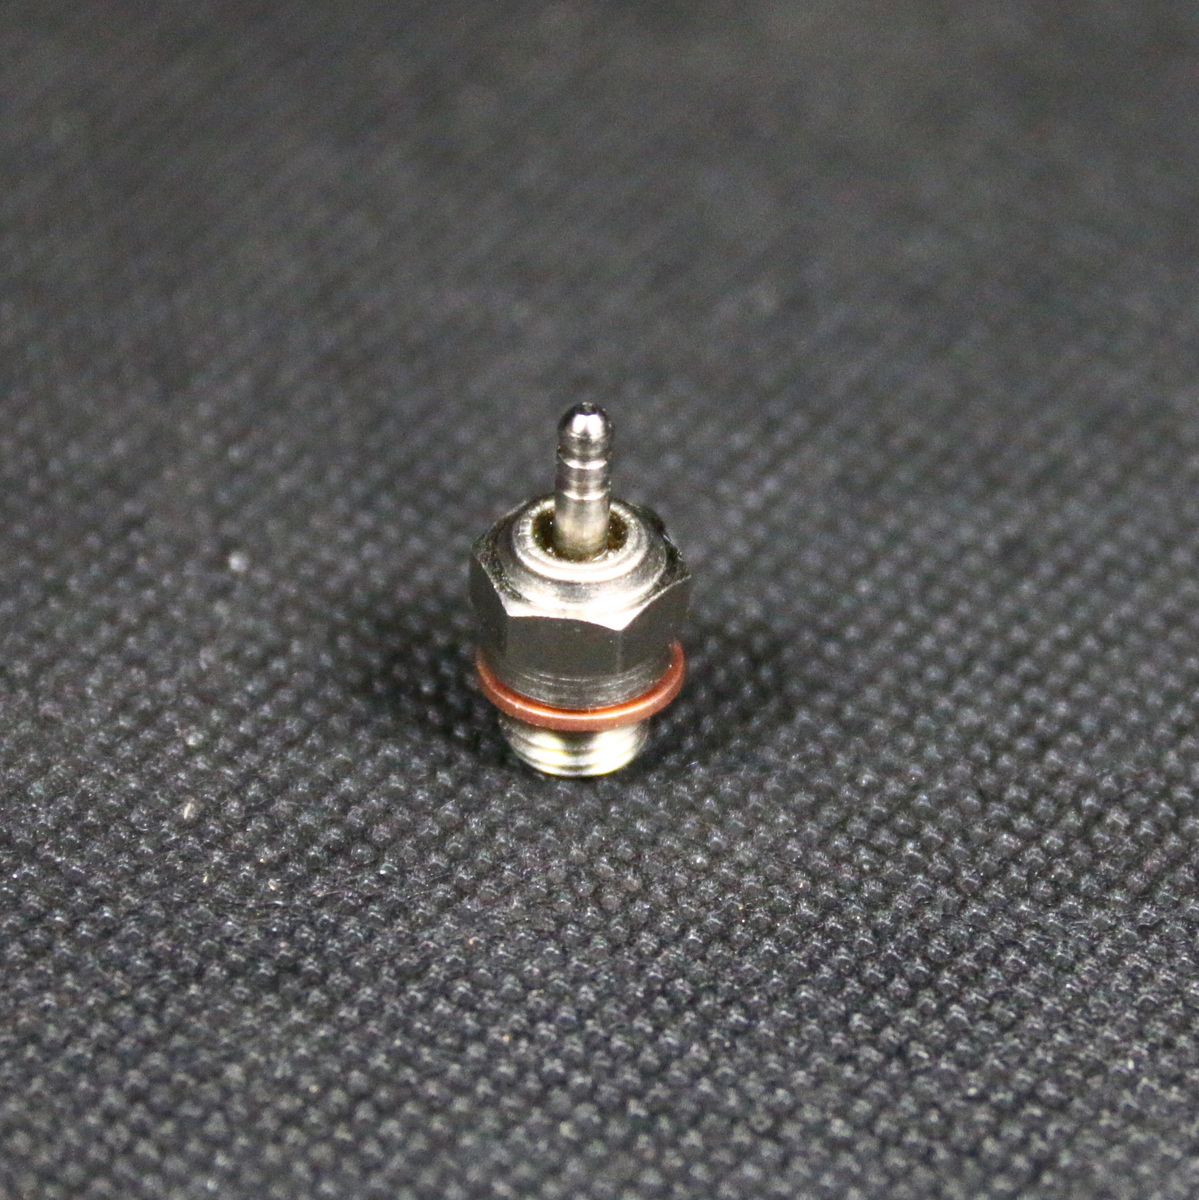 glow plug for model engines